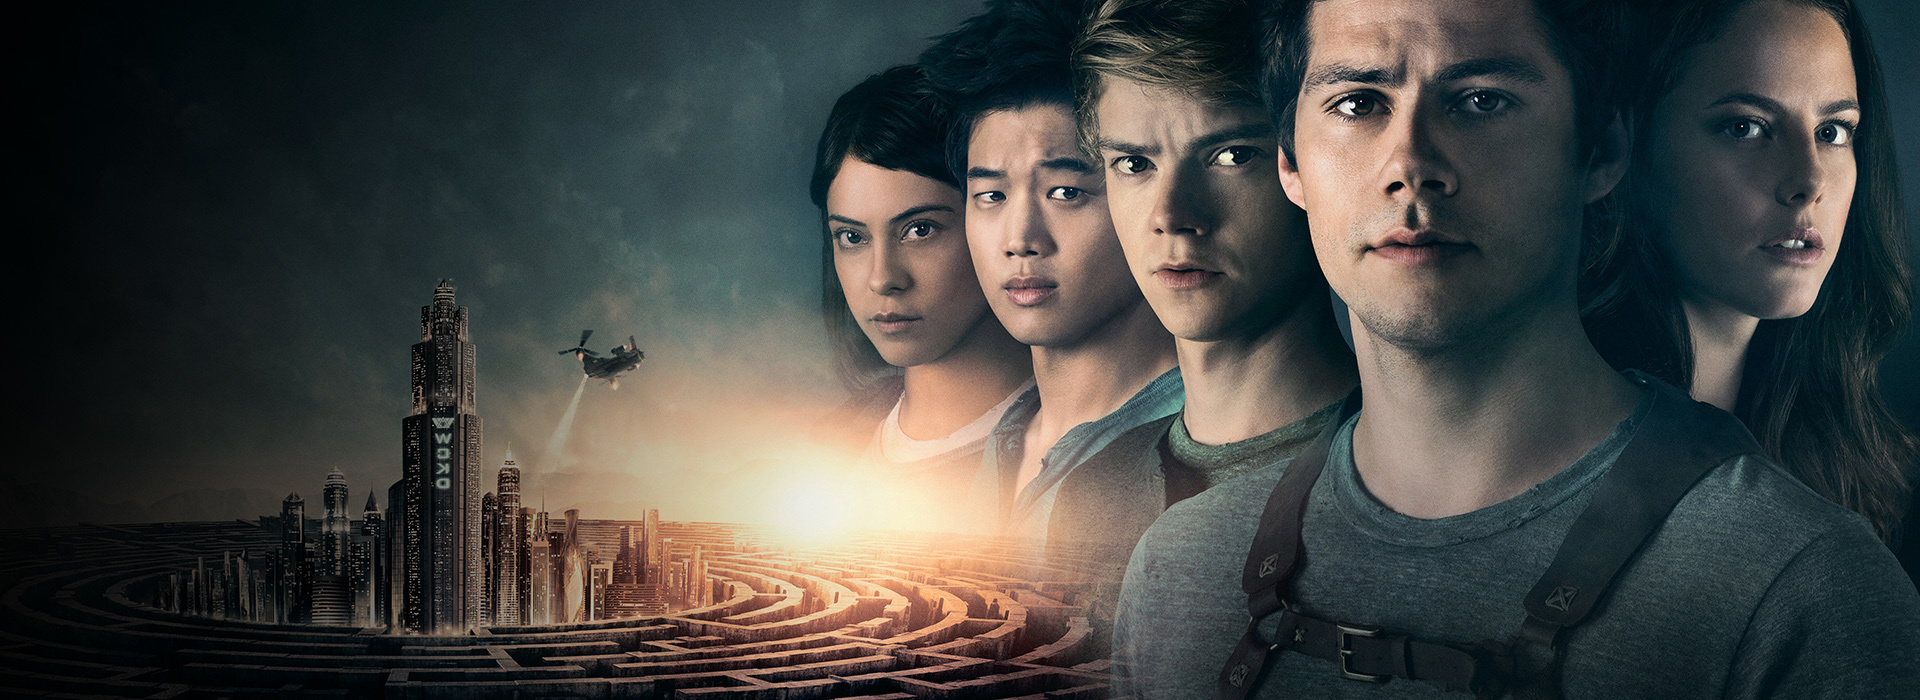 Movie poster Maze Runner: The Death Cure